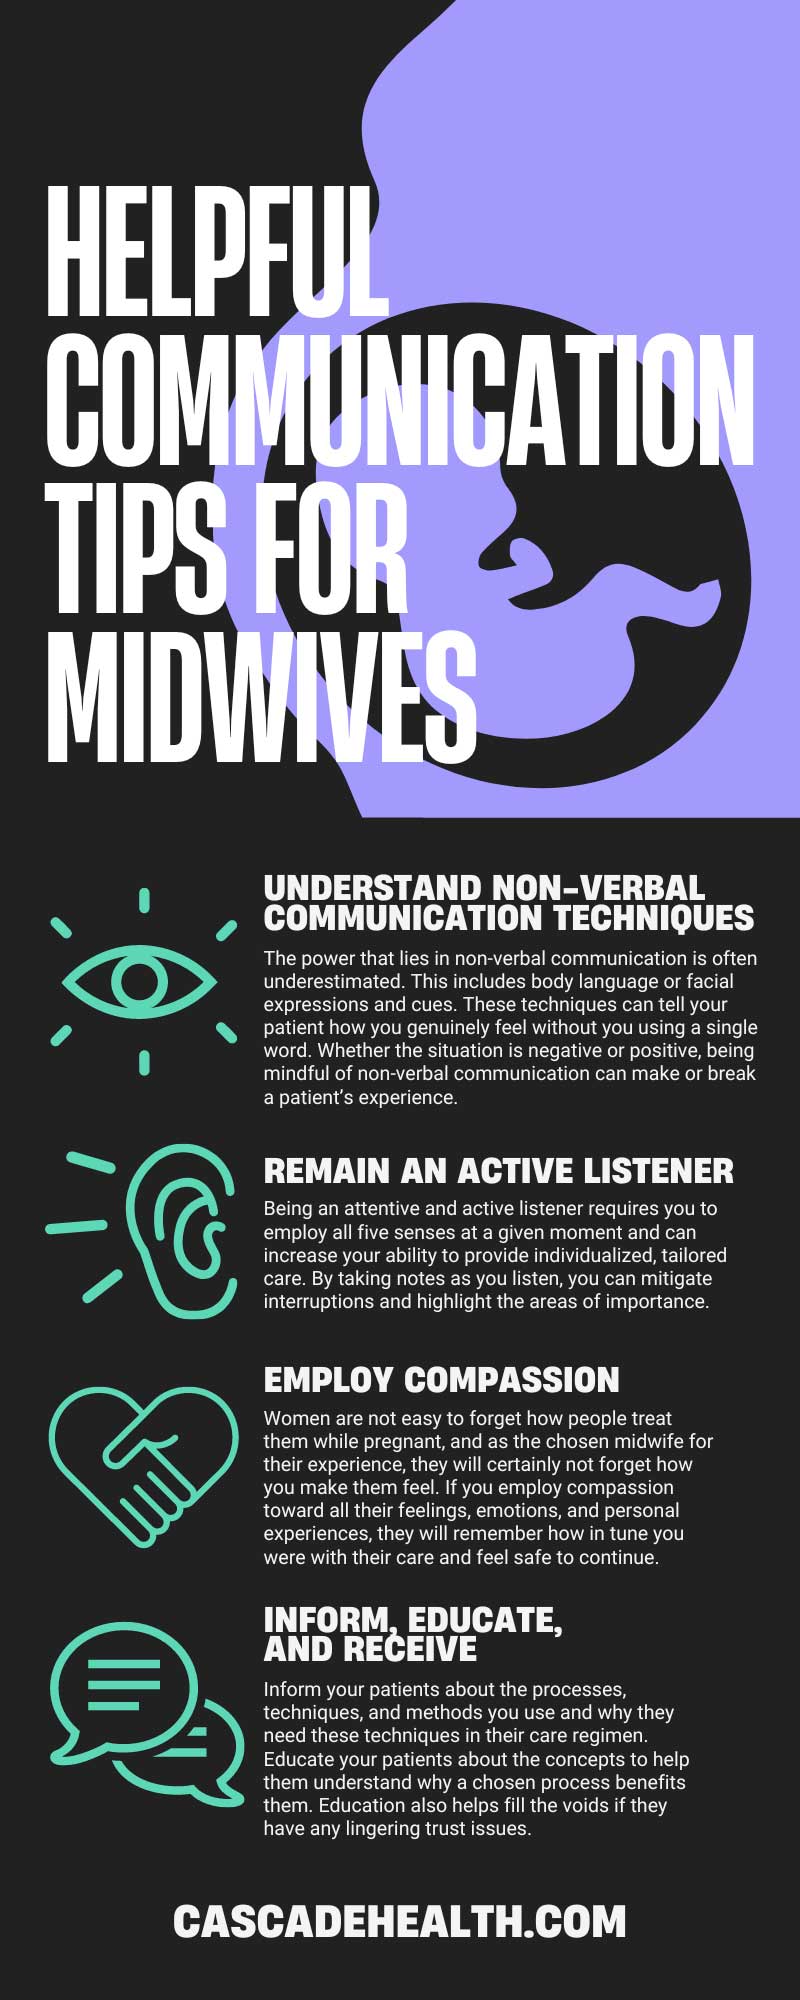 6 Helpful Communication Tips for Midwives